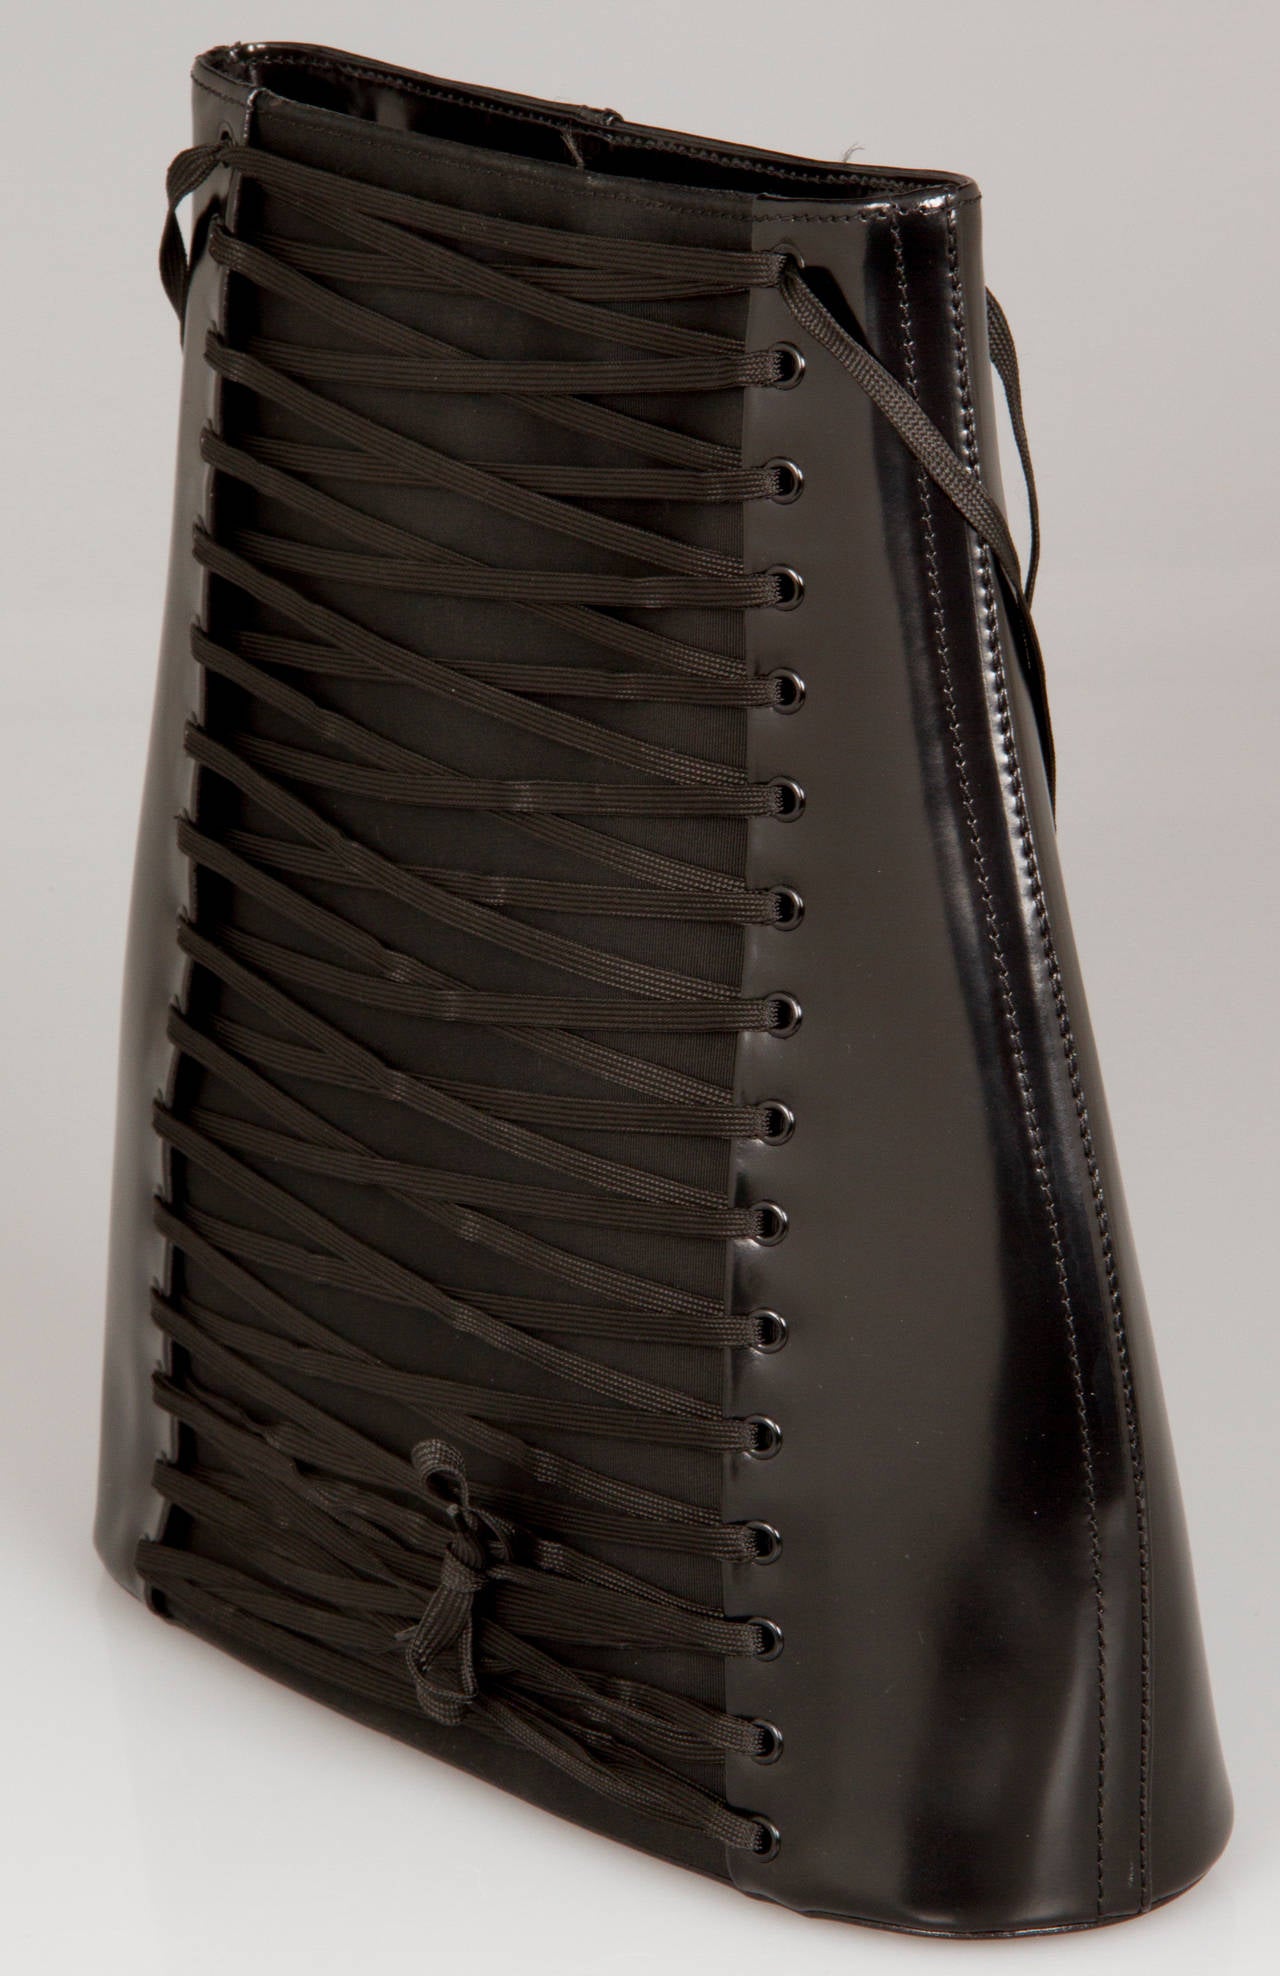 This fabulous black leather corset bag has a grosgrain panel on the front with criss-cross lacing, zippered top closure, interior zippered pocket and is  lined in black monogram fabric. It is stamped: Jean Paul Gaultier Maroquinerie.